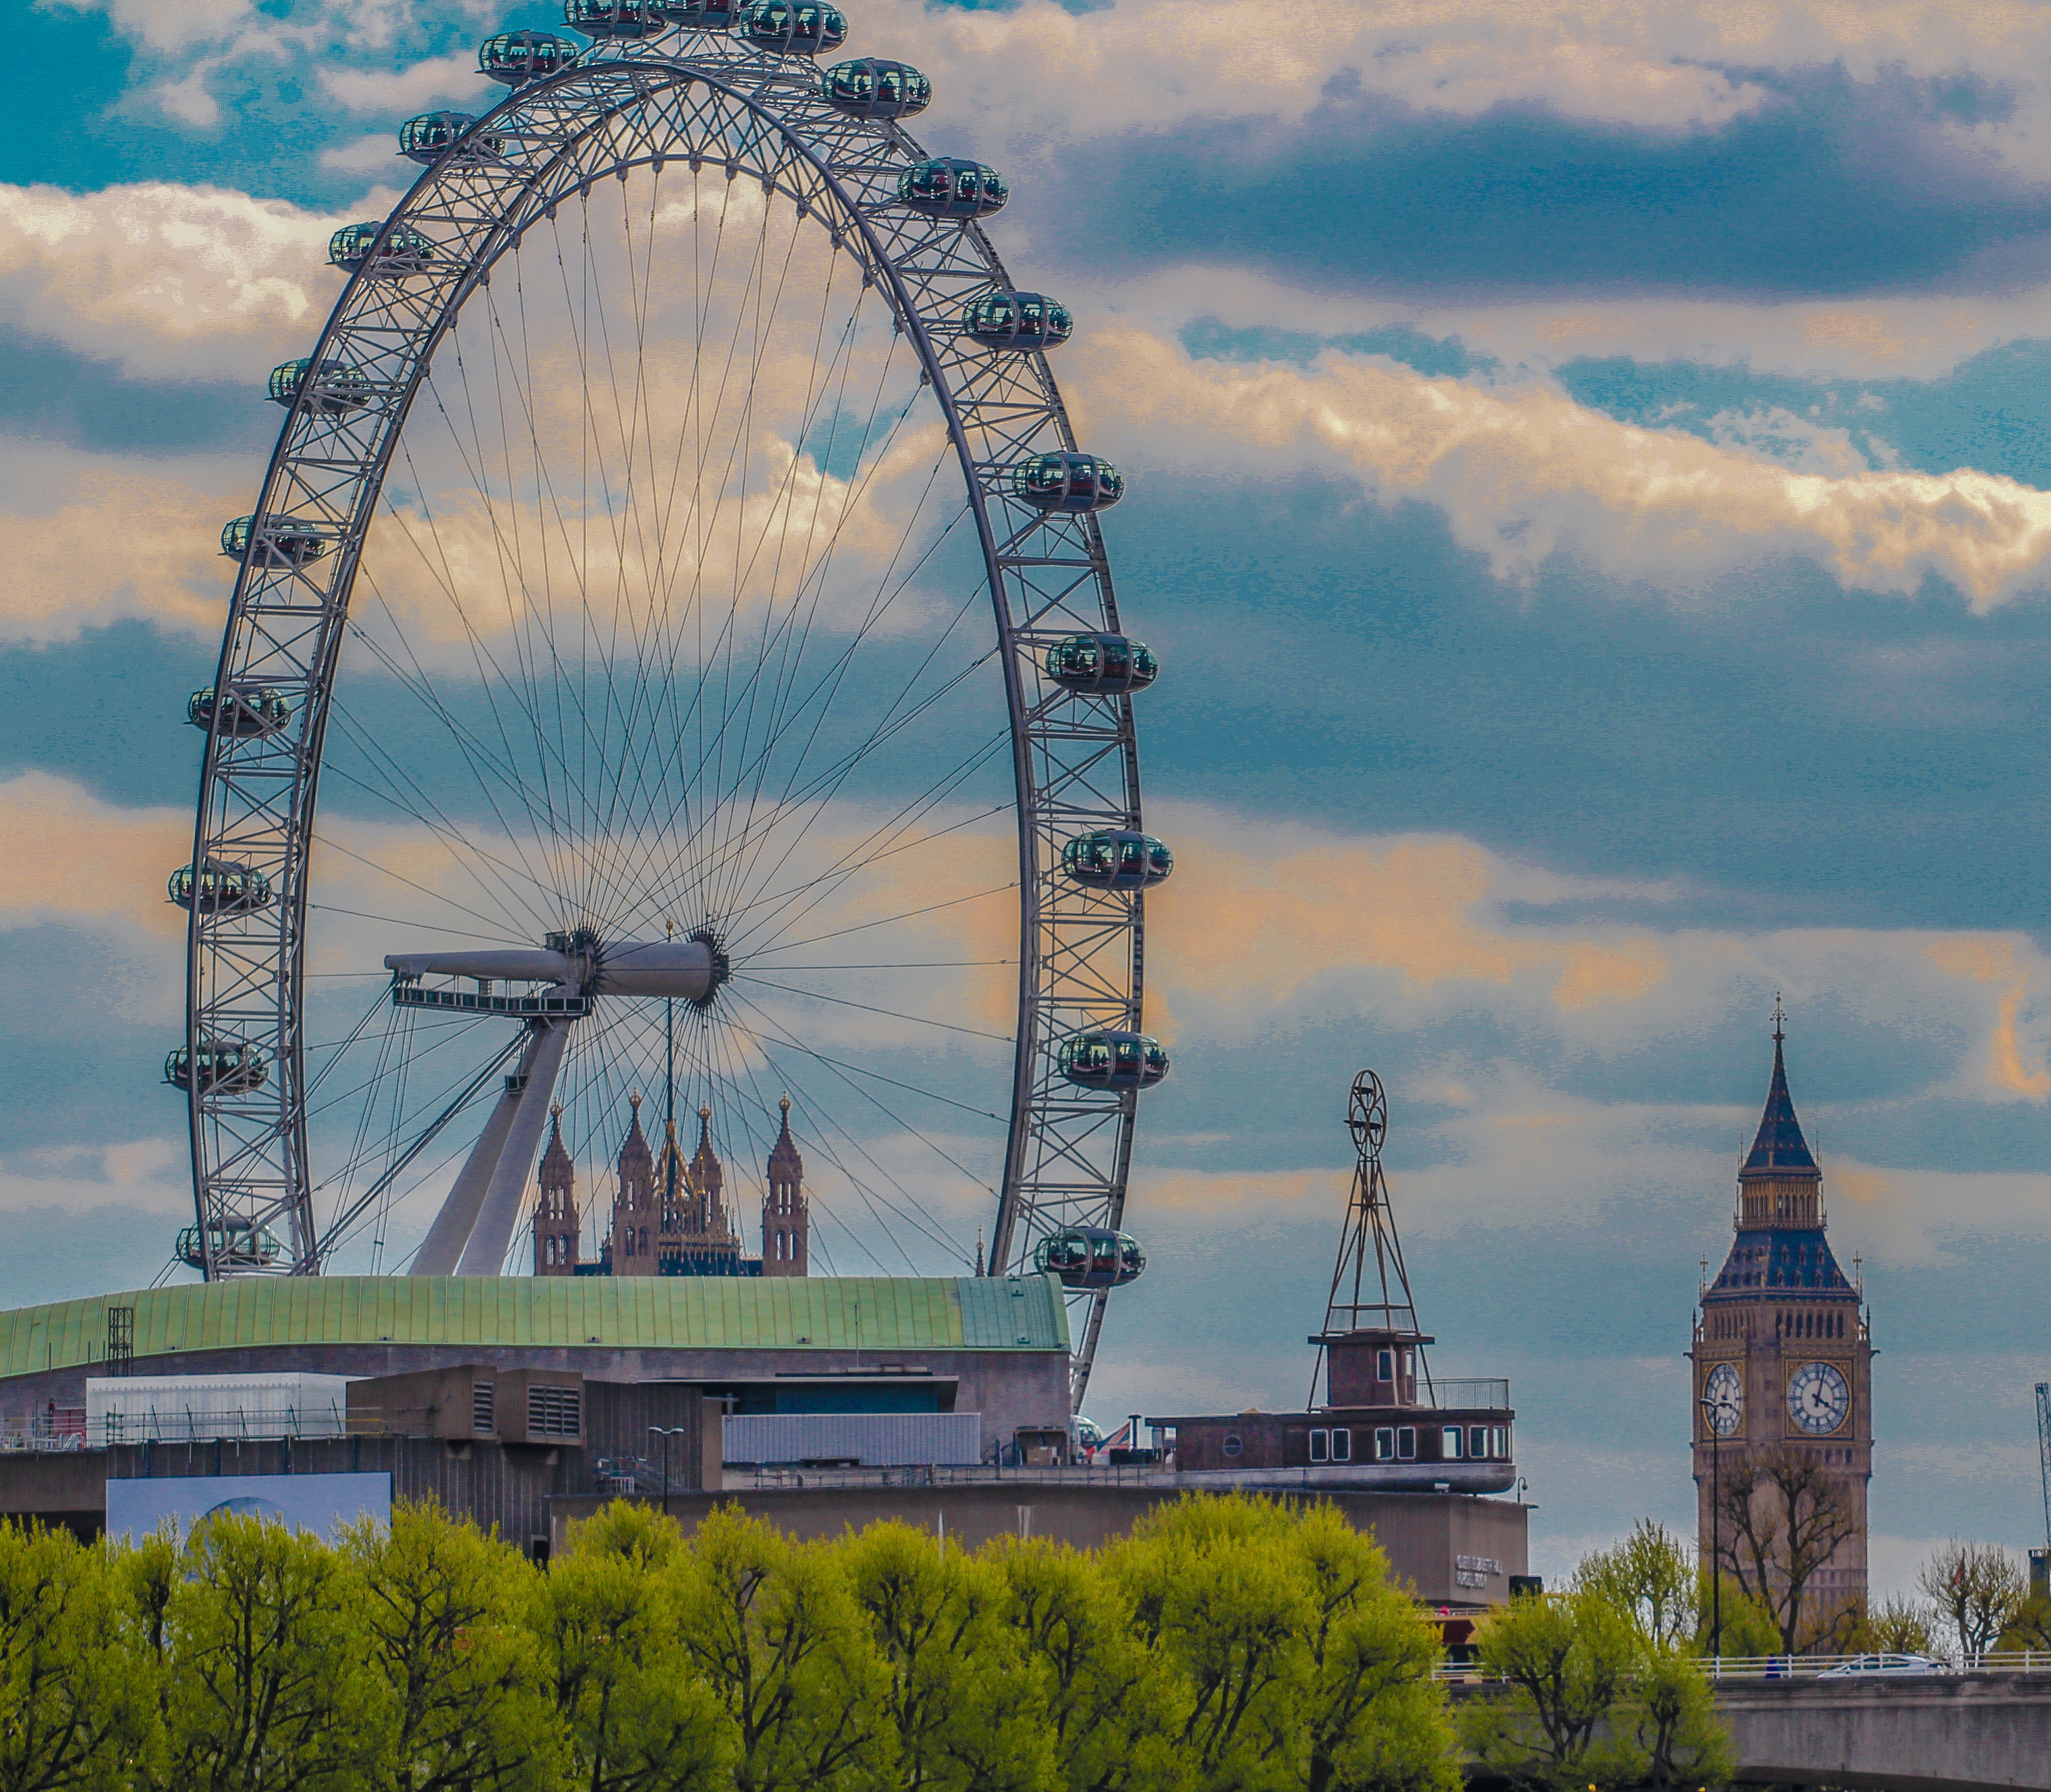 London Eye and Big Ben Tower Photo, Architecture, Palace of Westminster, Trees, Travel, HQ Photo